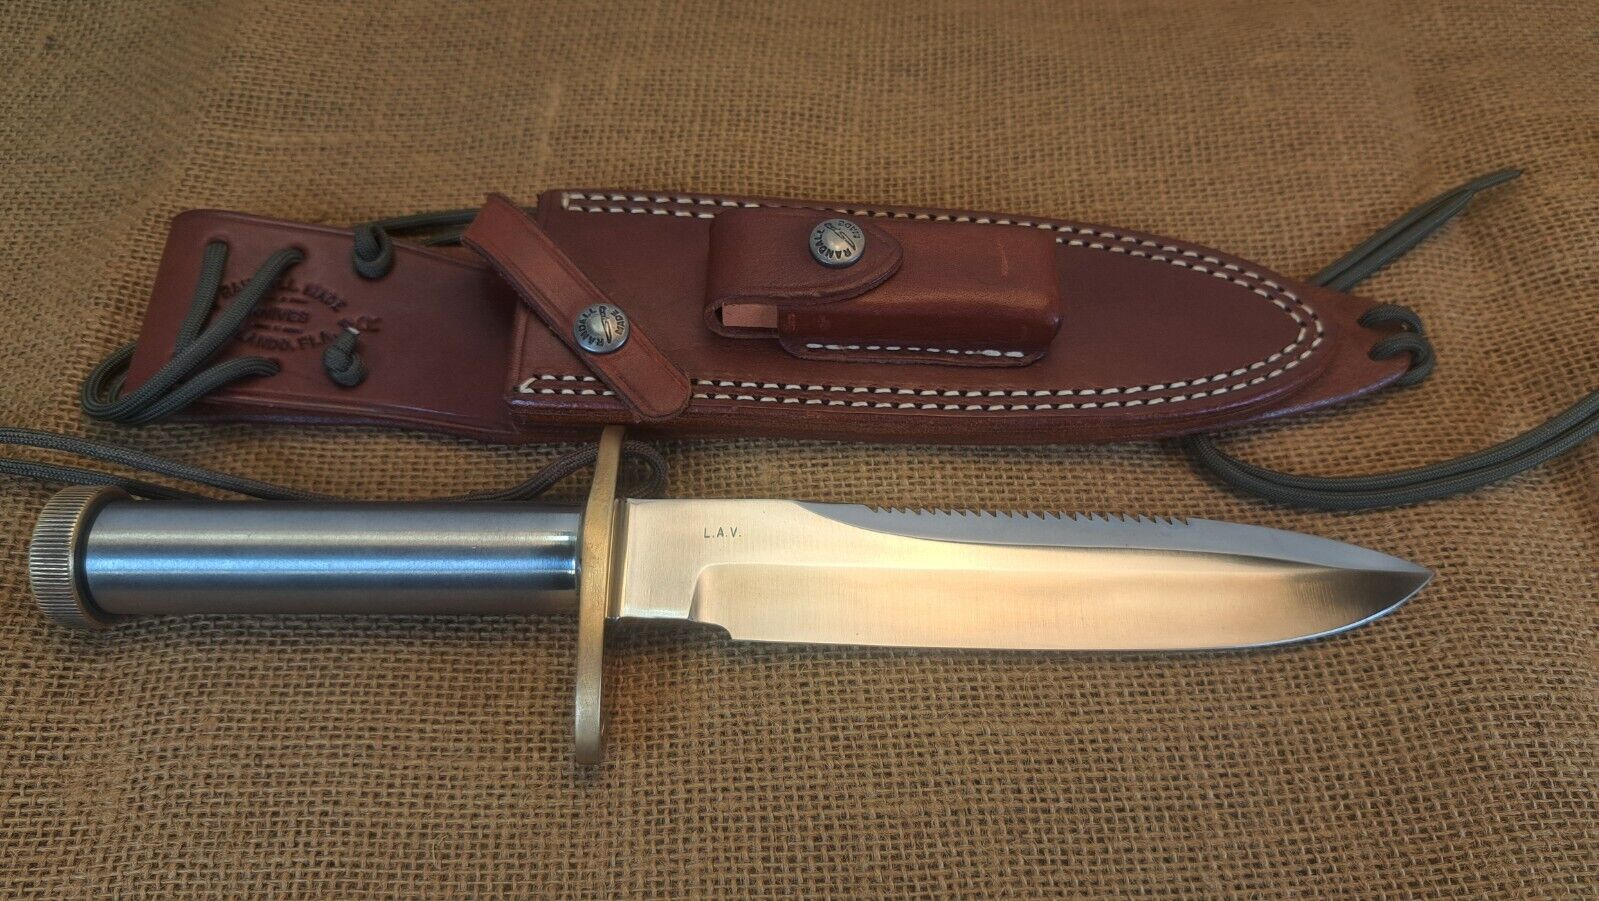 Randall Made Knife Model 18 -Owned By Larry Vickers-